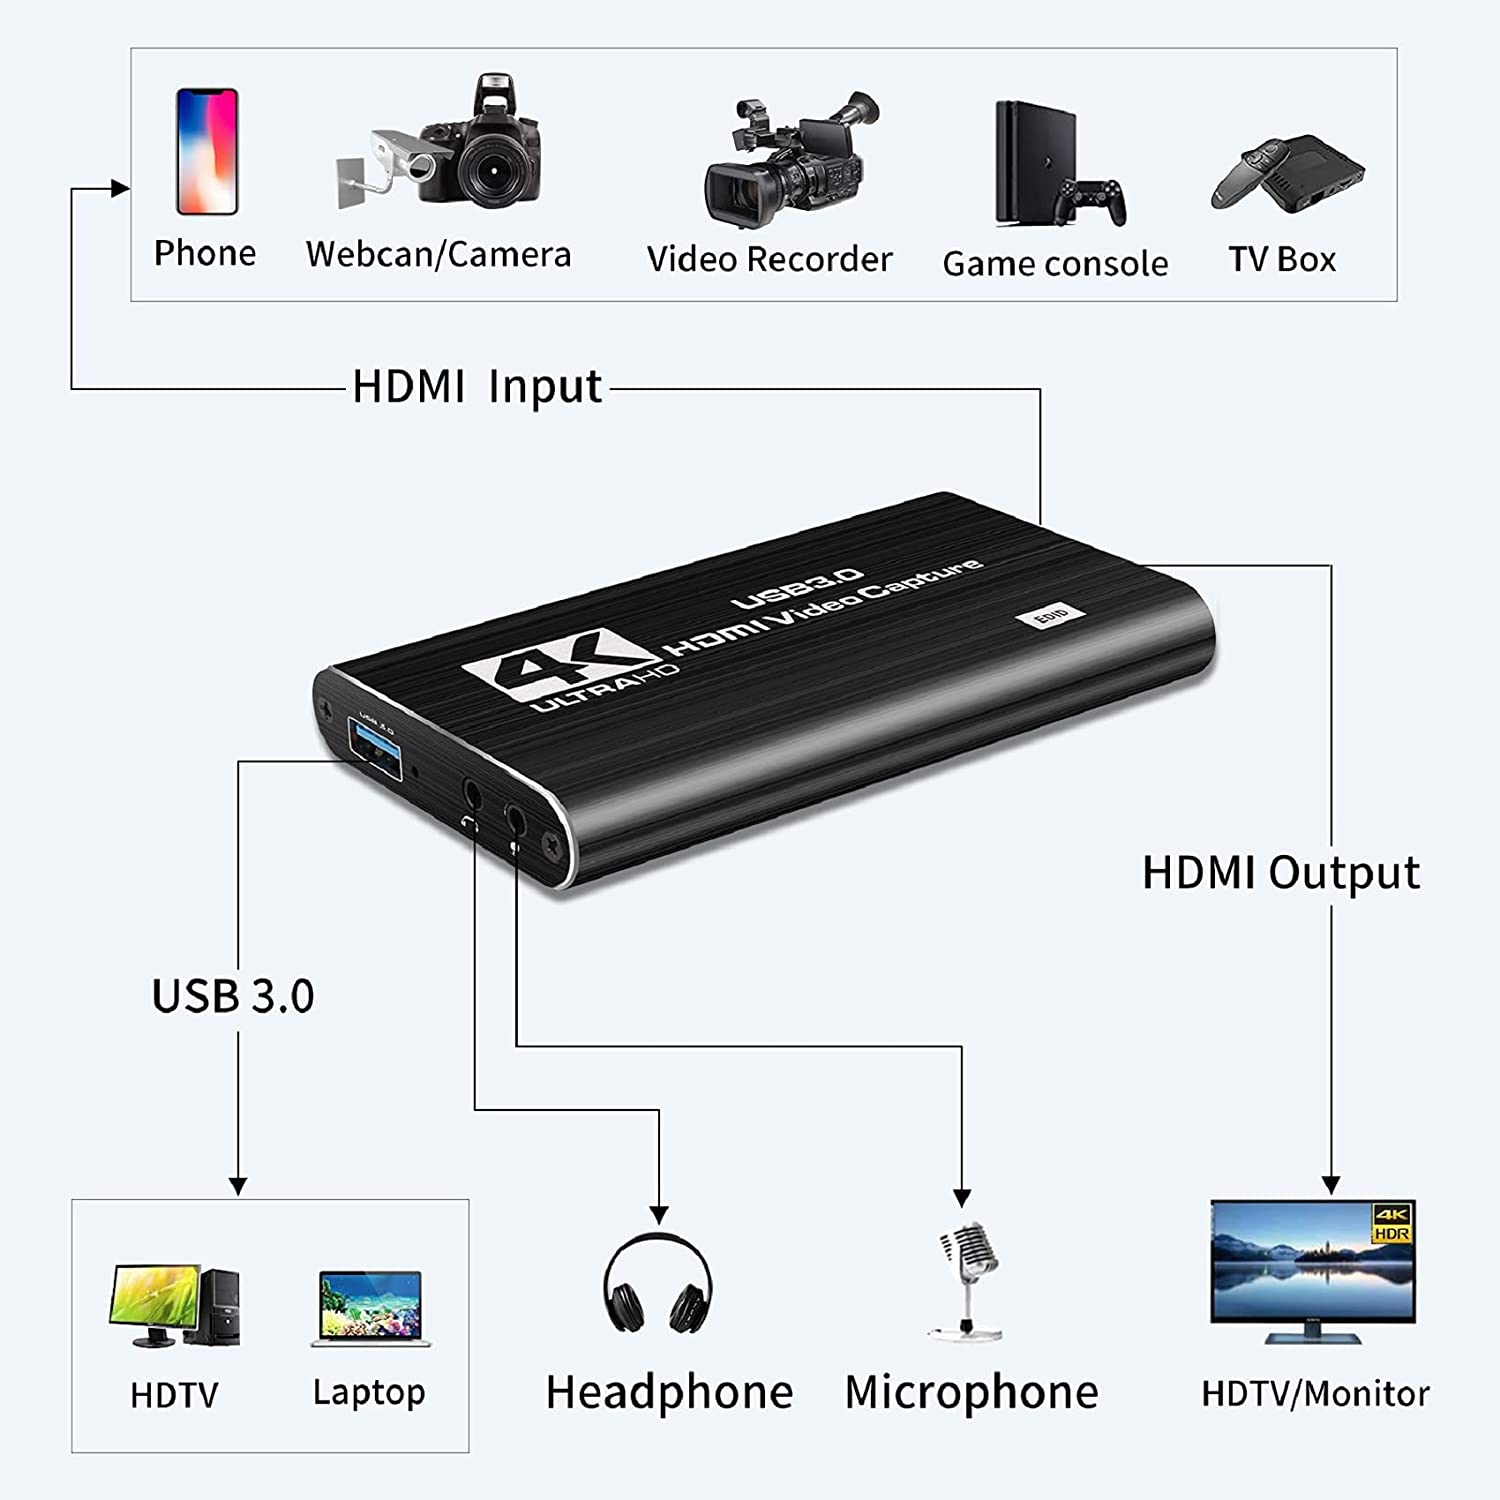 HDMI Video Capture Card With Audio - 3.0 USB